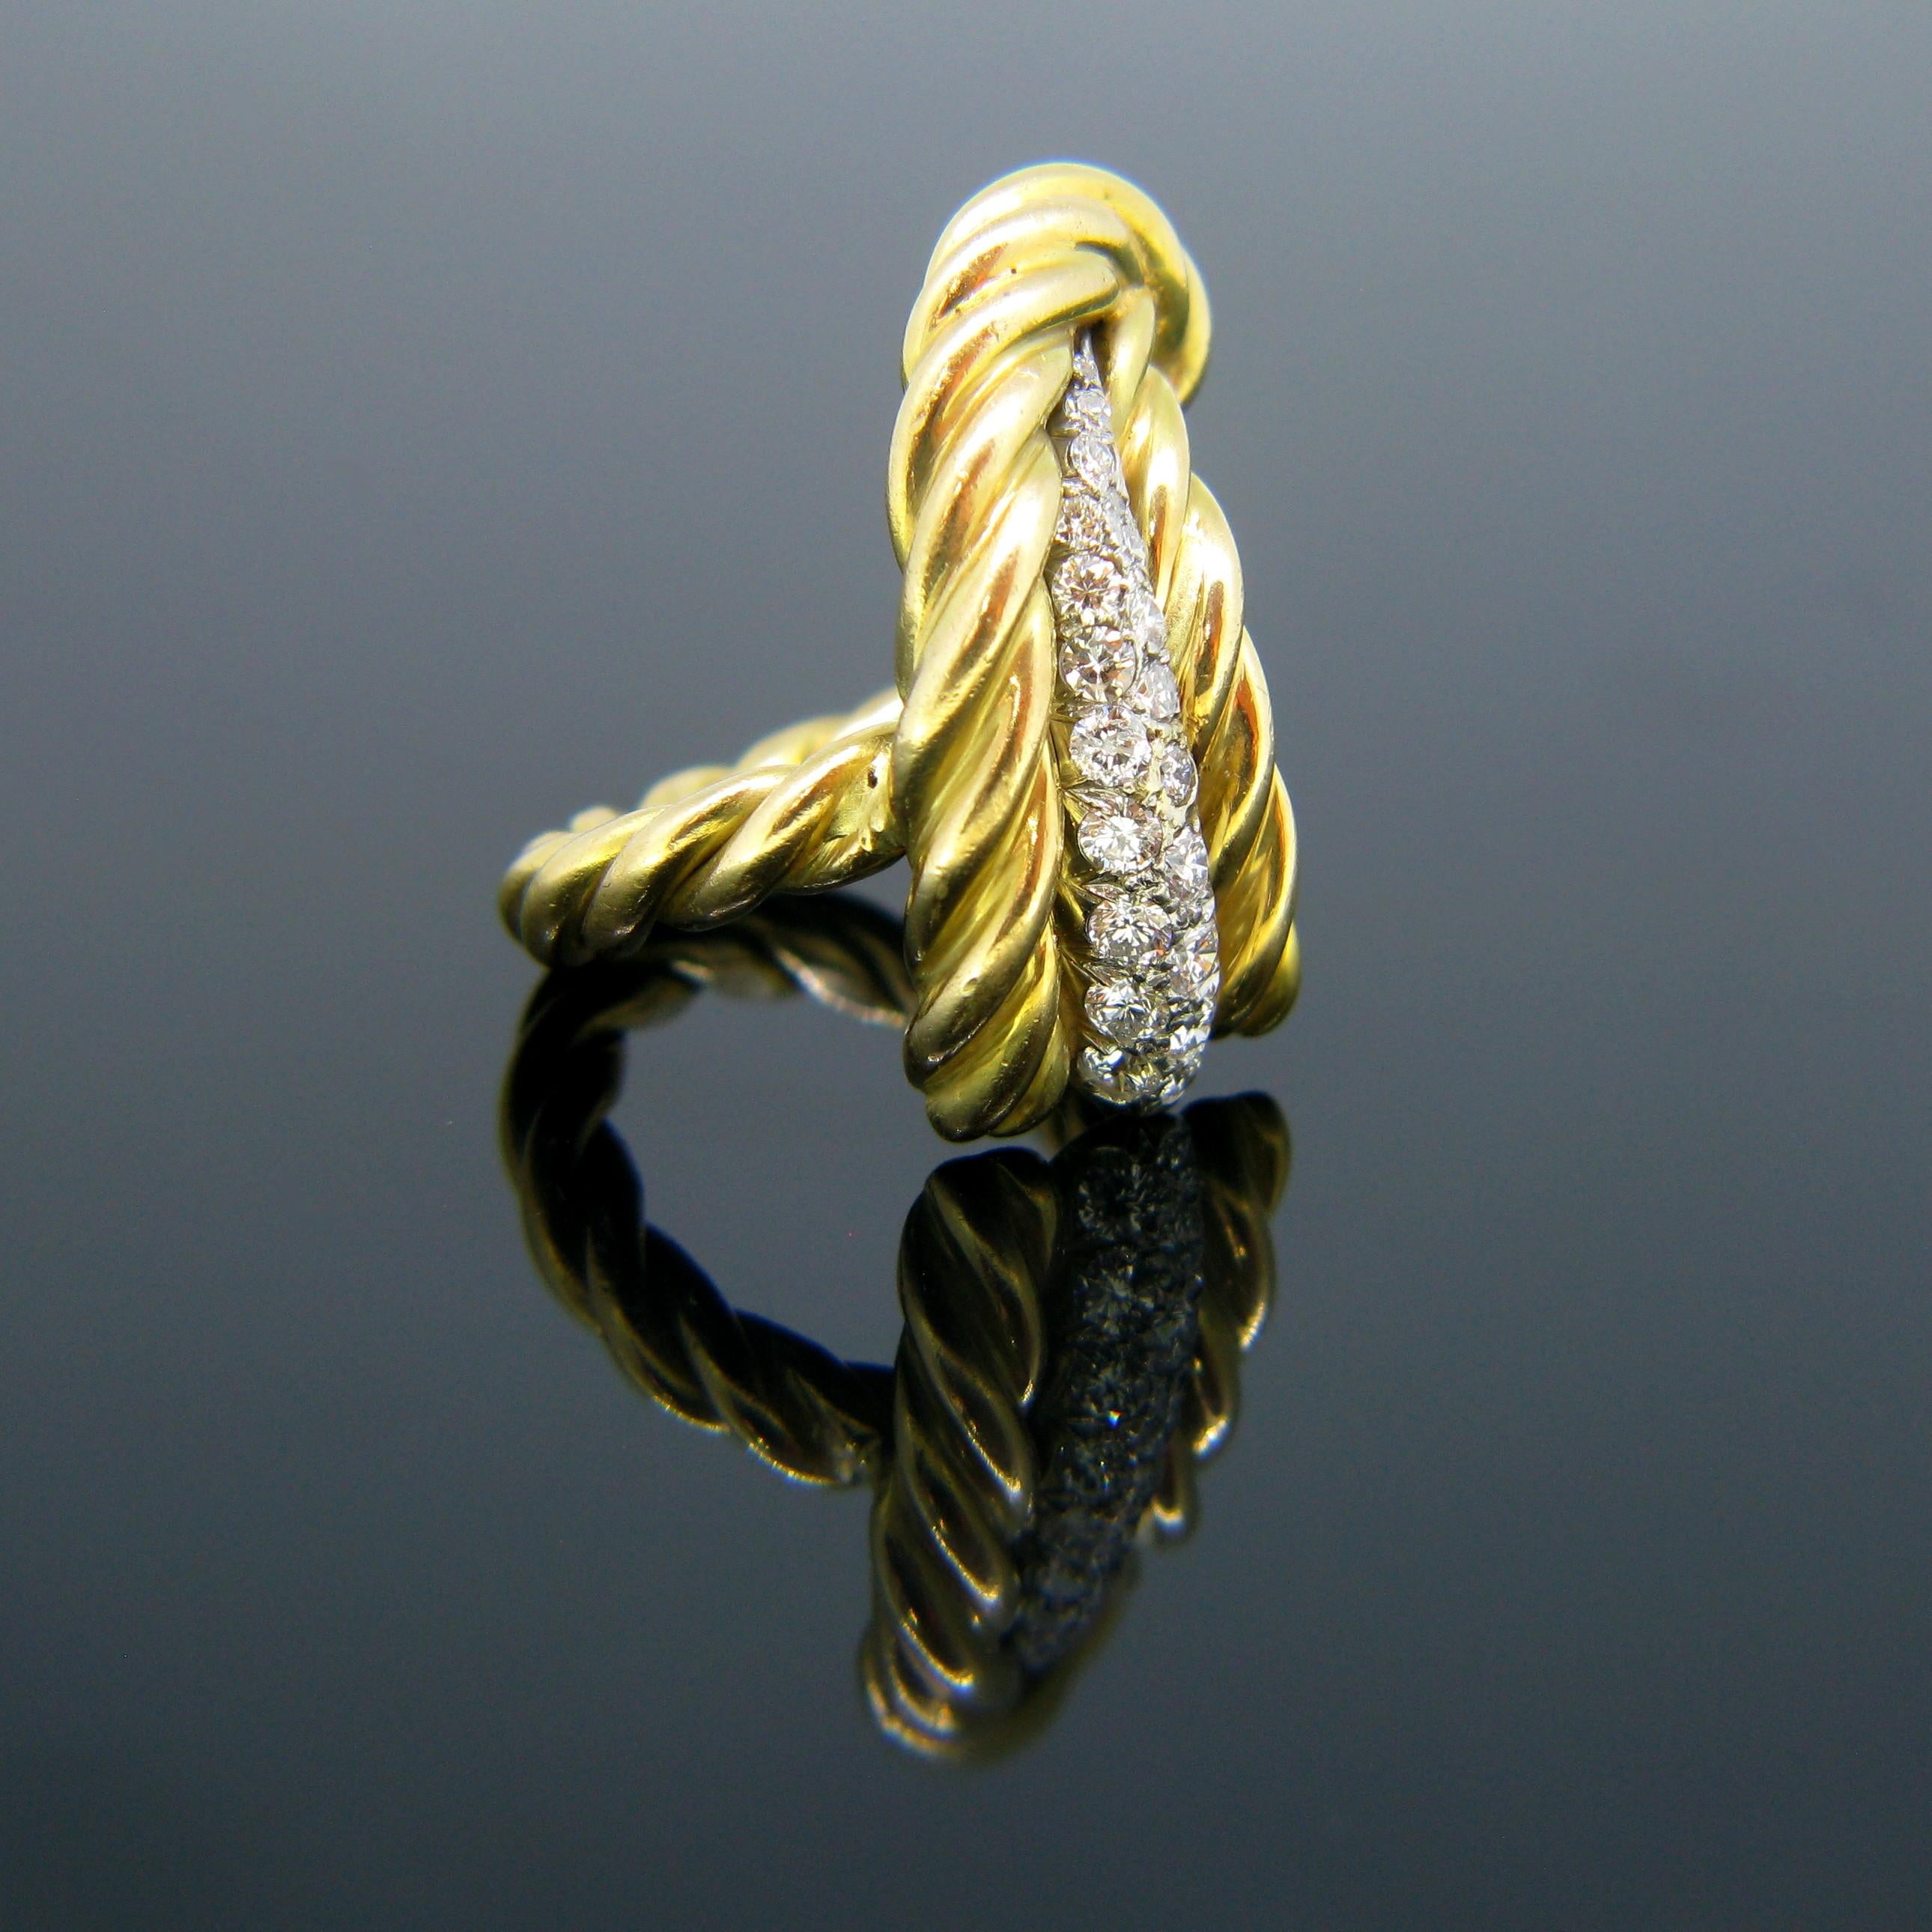 This ring comes directly from the retro era. It is made in 18kt yellow gold and the diamonds at the top are set in platinum. There are 20 round cut diamonds for a total carat weight of around 0.70ct. The ring is in the shape of a feather; the gold